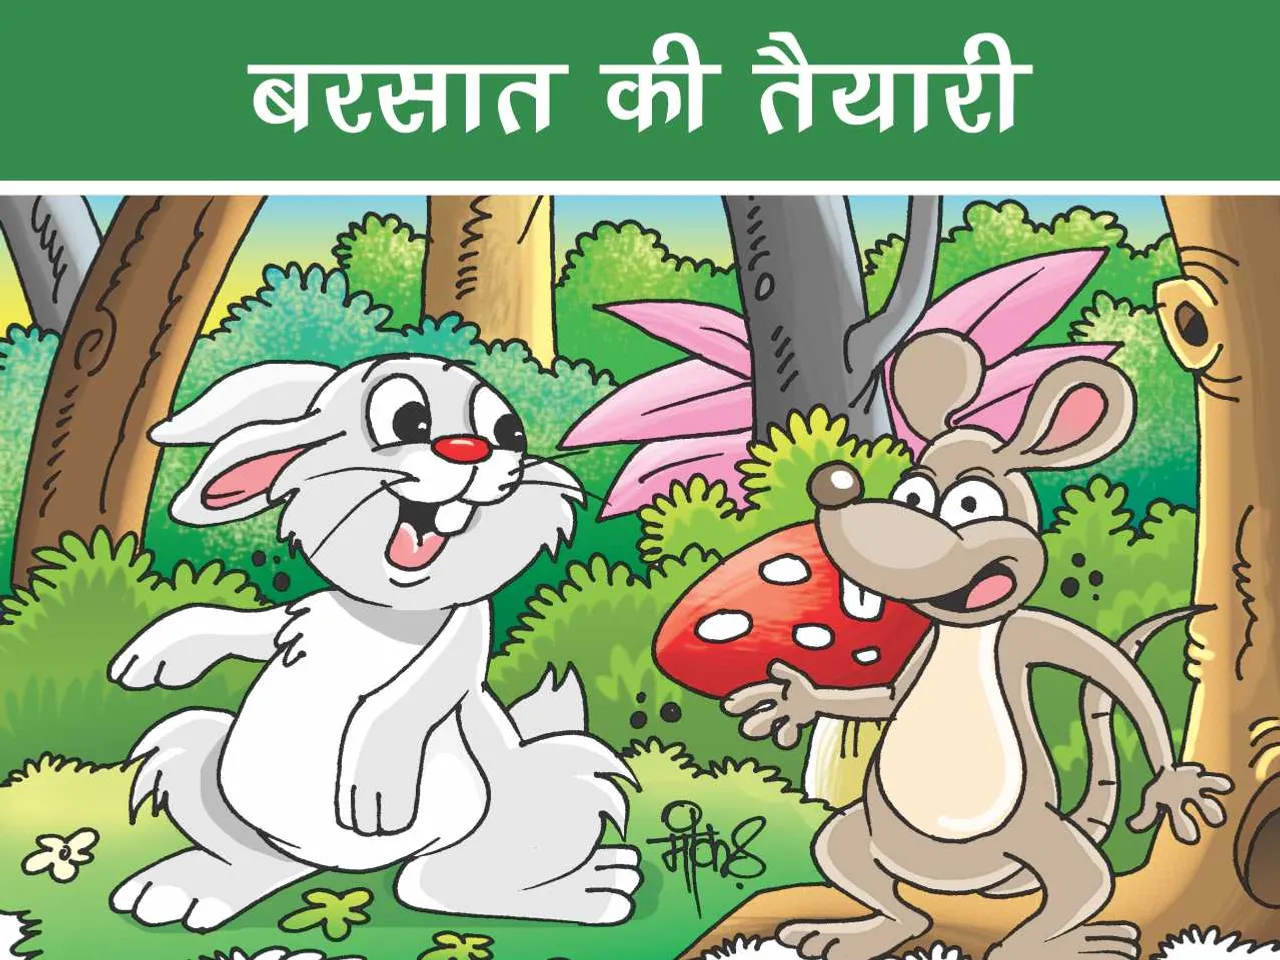 Rabbit and mouse cartoon image